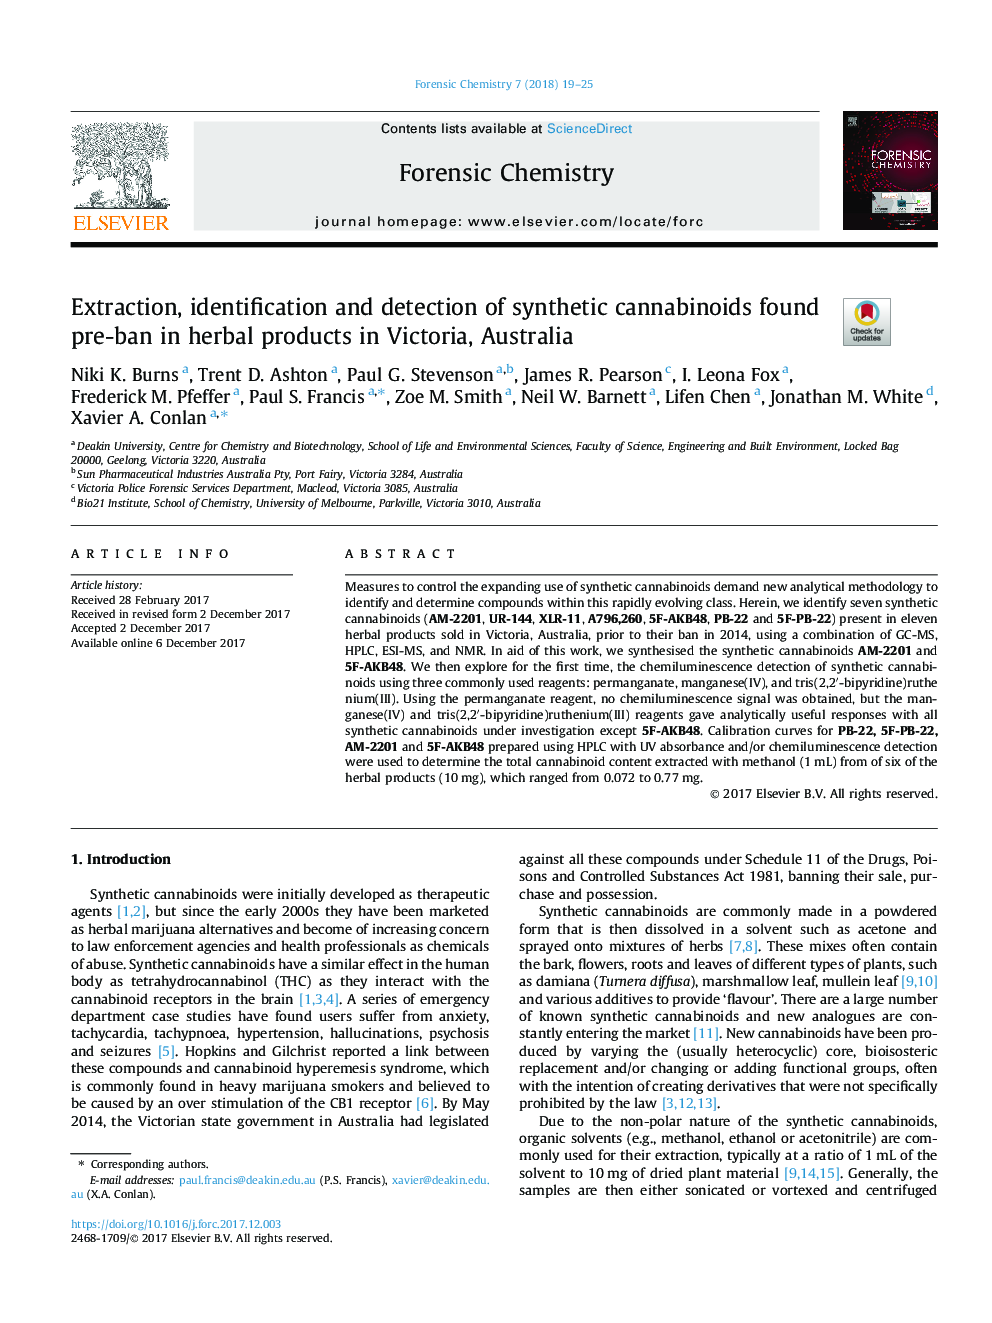 Extraction, identification and detection of synthetic cannabinoids found pre-ban in herbal products in Victoria, Australia